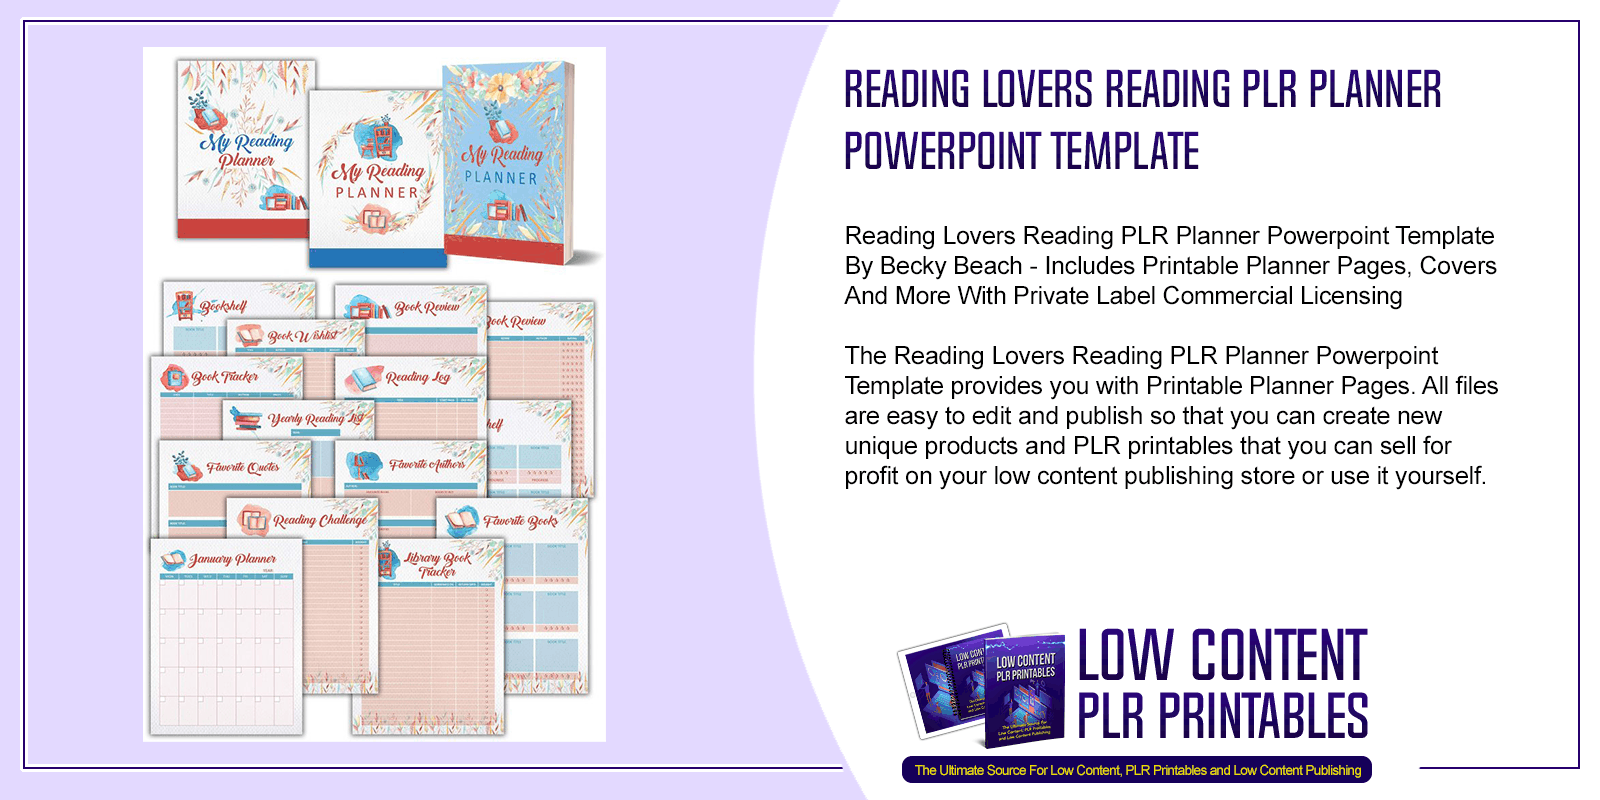 Reading Lovers Reading PLR Planner Powerpoint Template